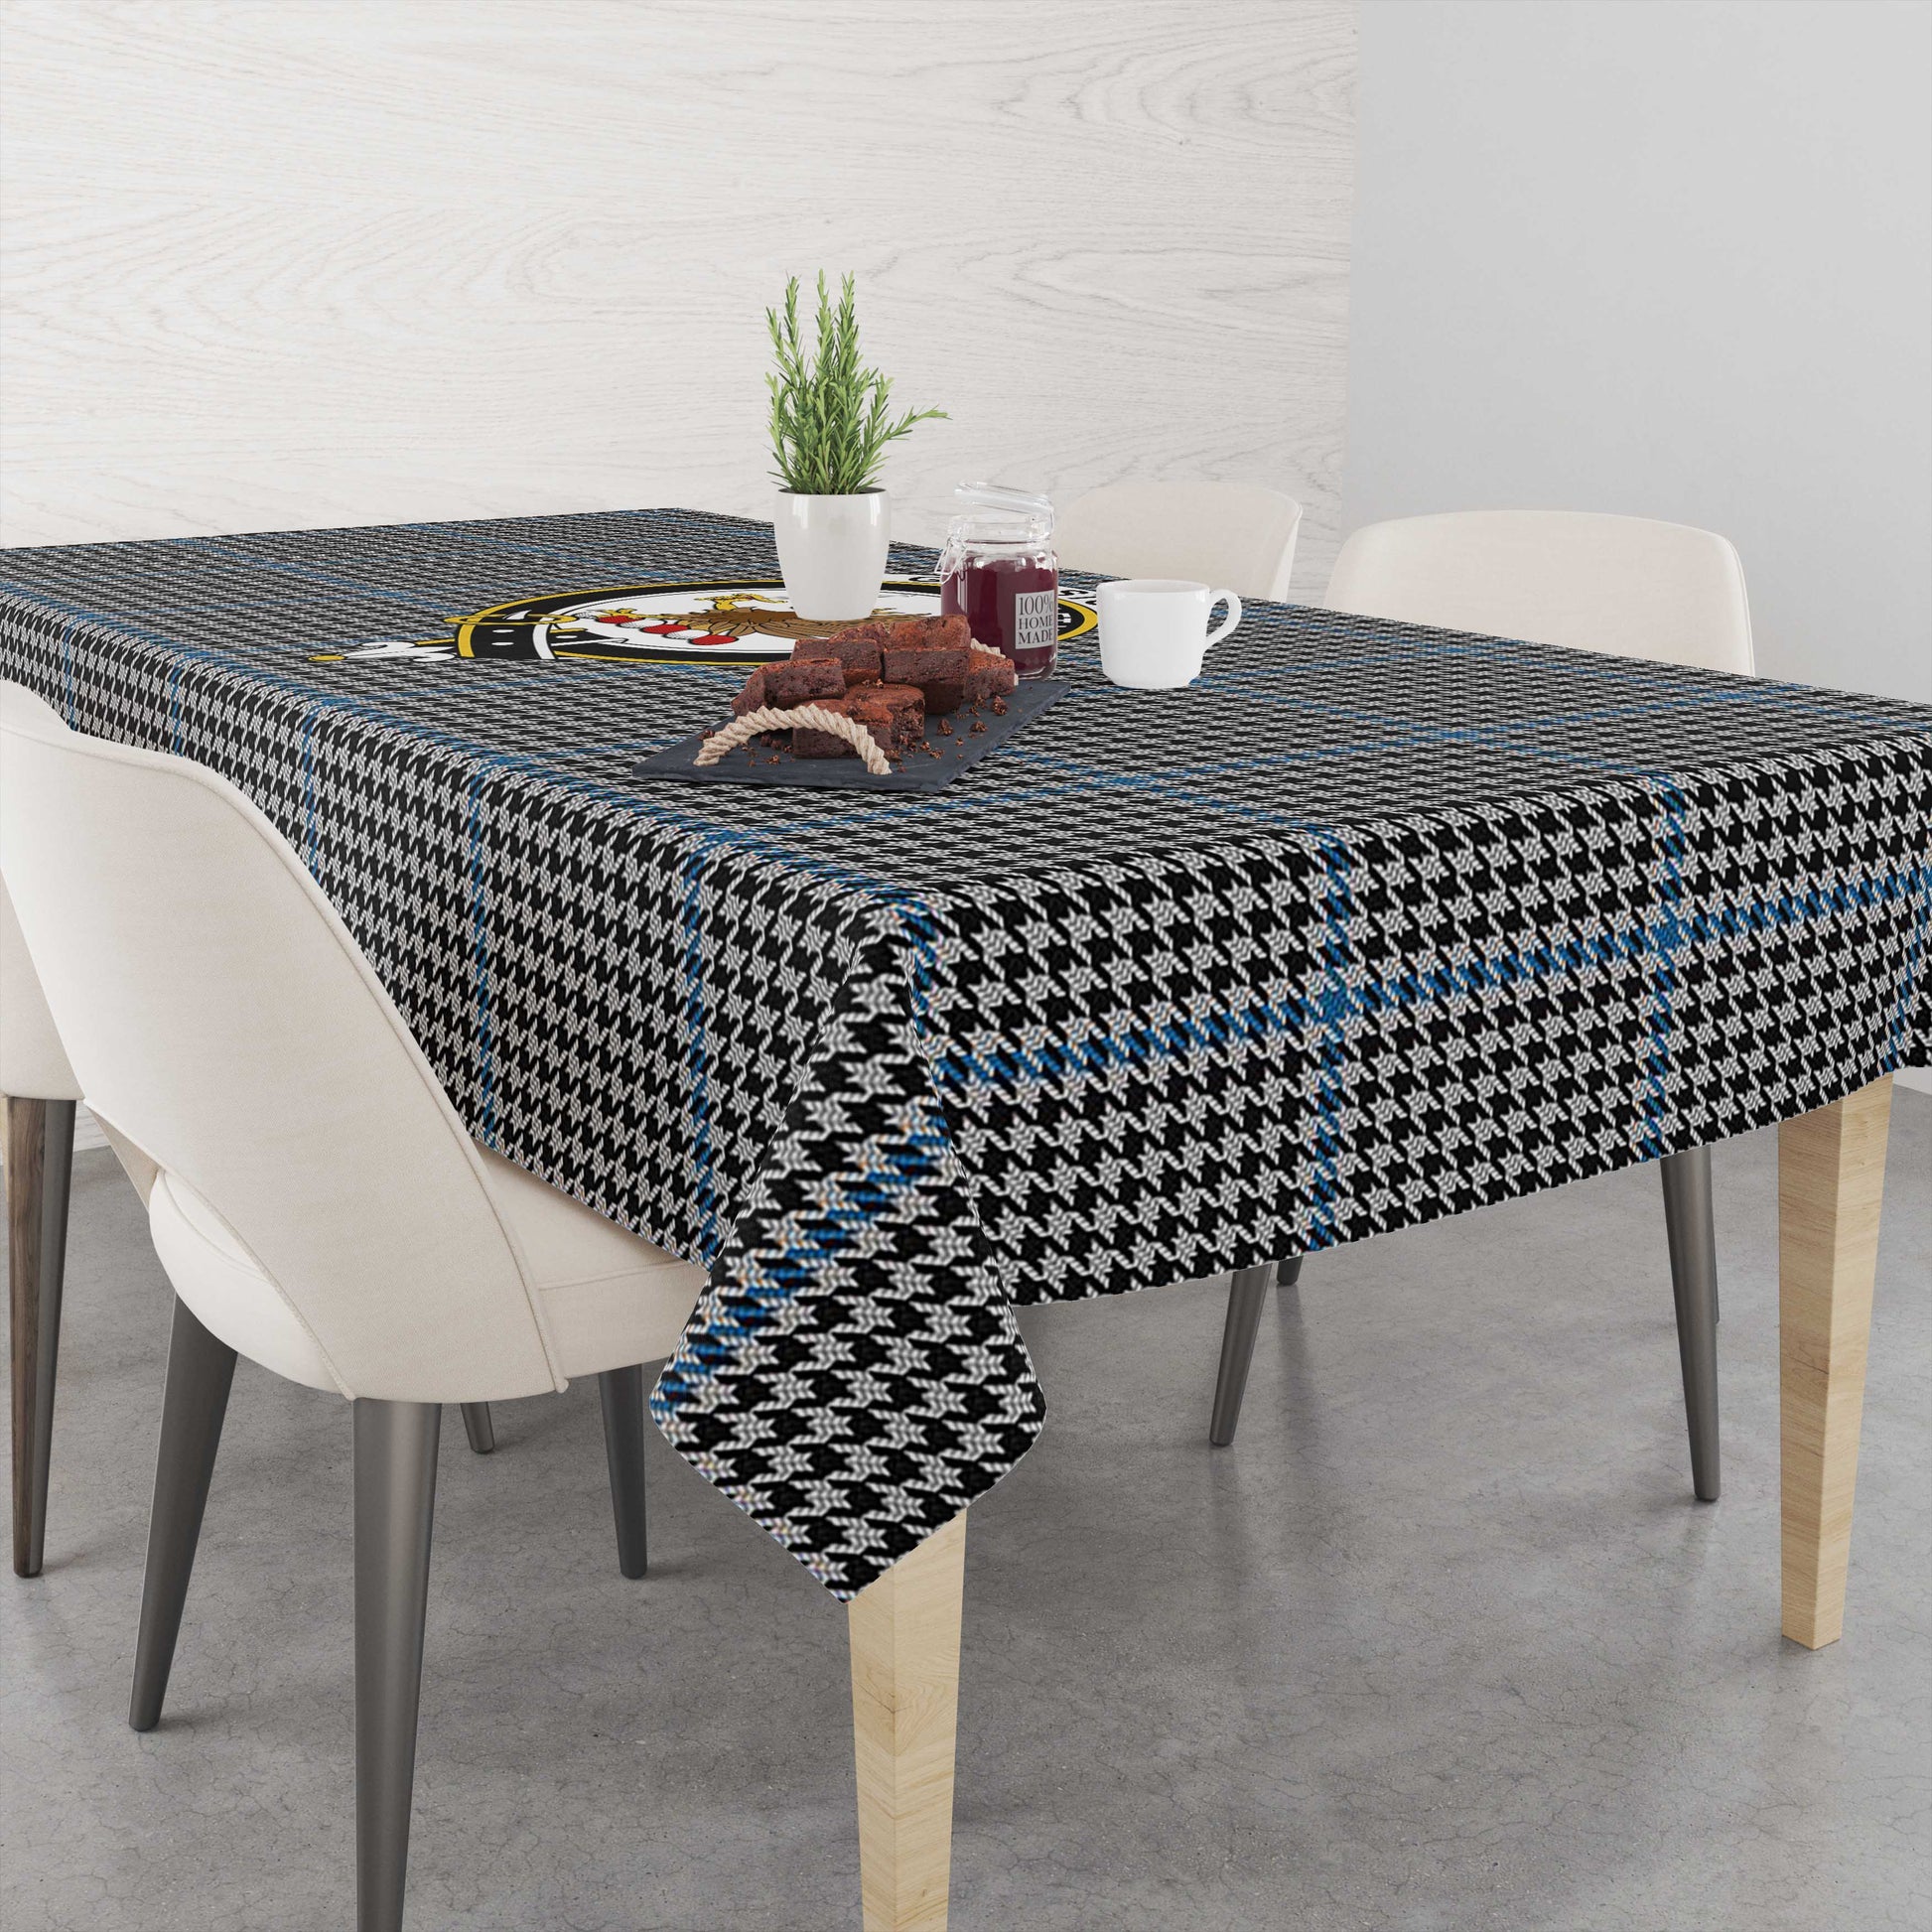 gladstone-tatan-tablecloth-with-family-crest